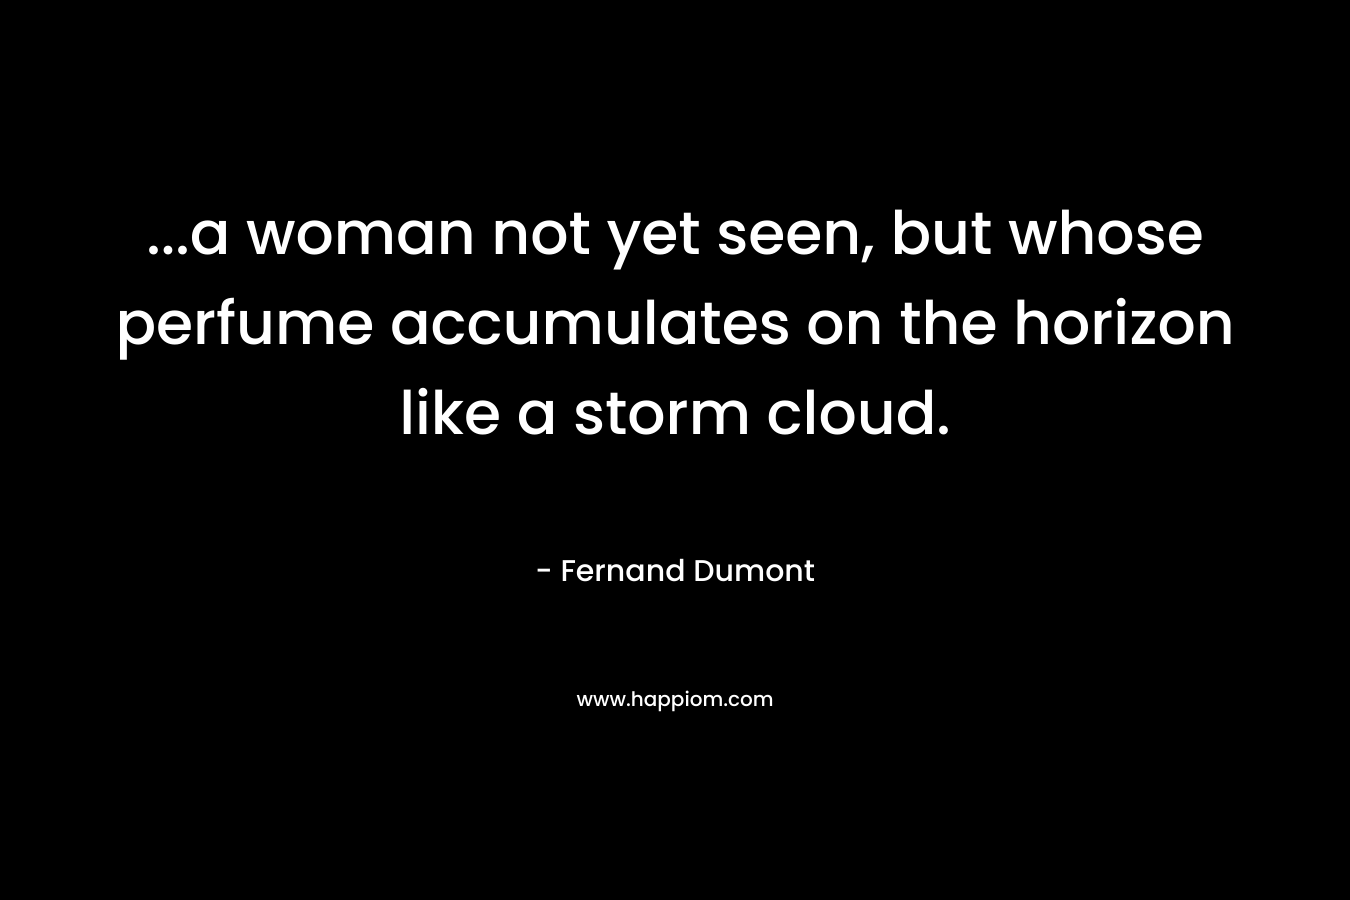 ...a woman not yet seen, but whose perfume accumulates on the horizon like a storm cloud.